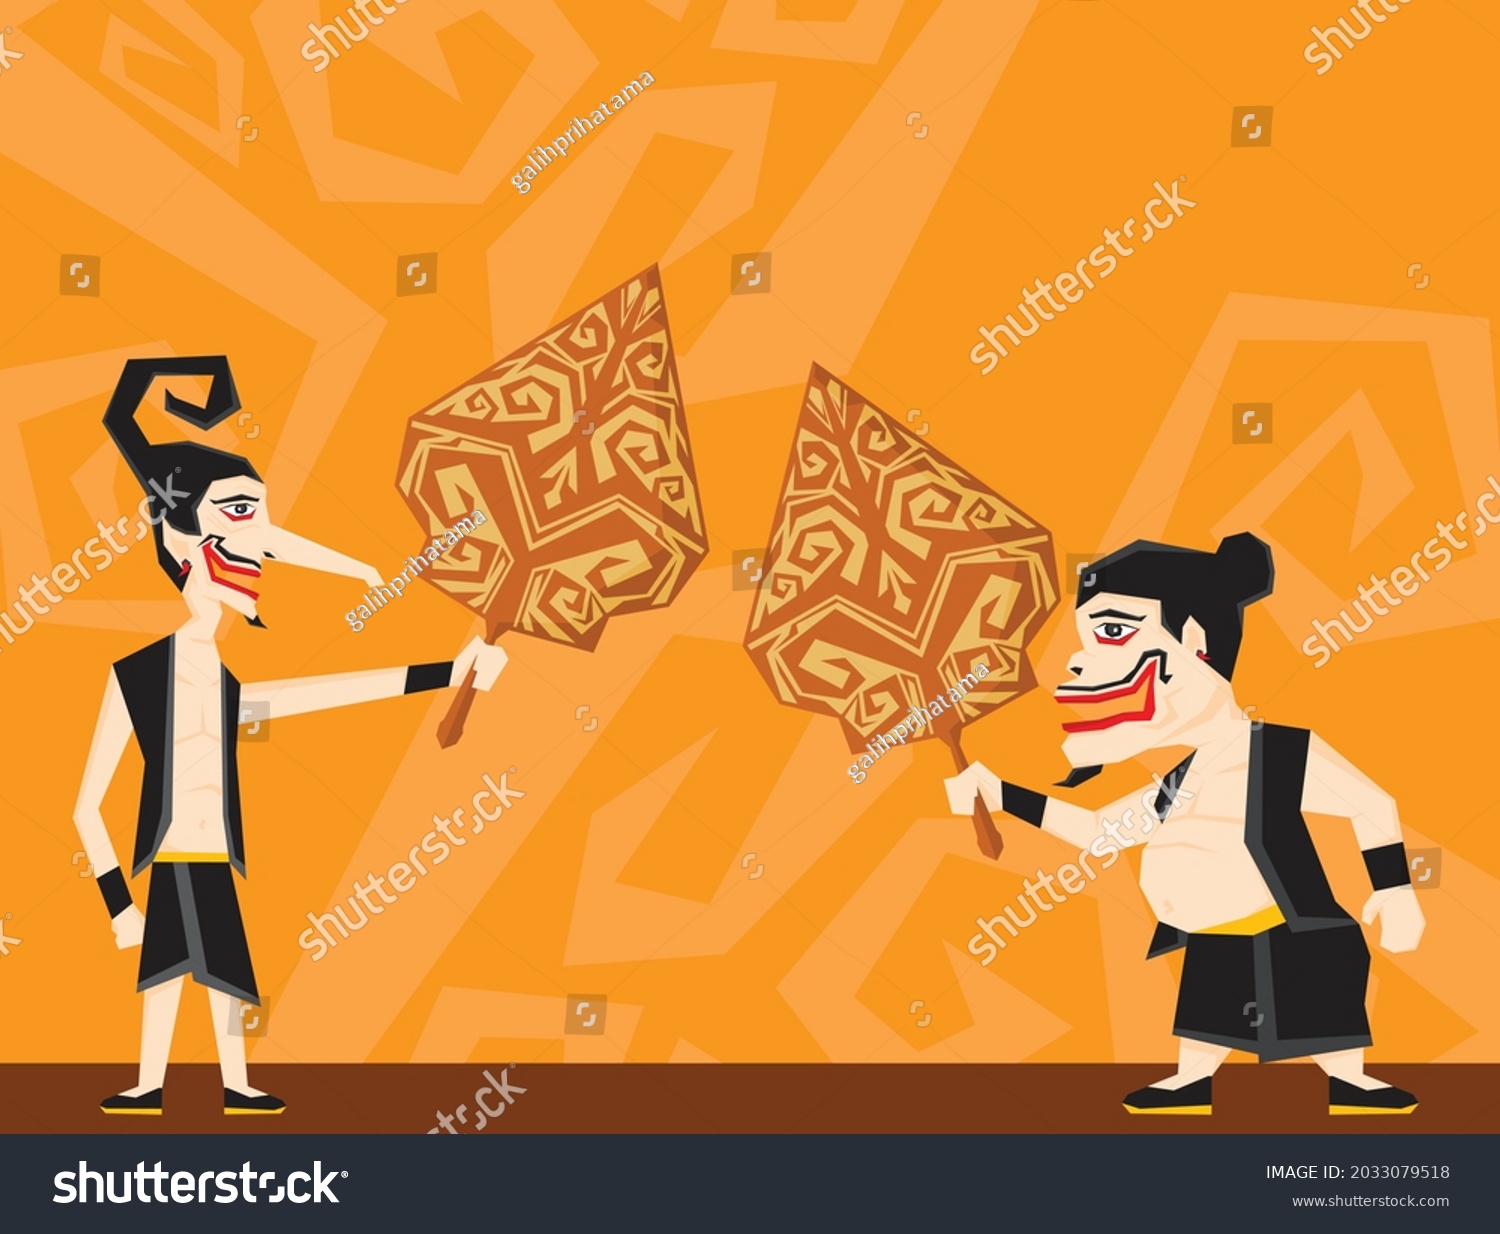 SVG of An illustration of member from Punakawan, Petruk and Bagong, holding a Gunungan wayang. Punakawan figures is very well known in the world of Wayang, one of Indonesia's unique traditions. svg